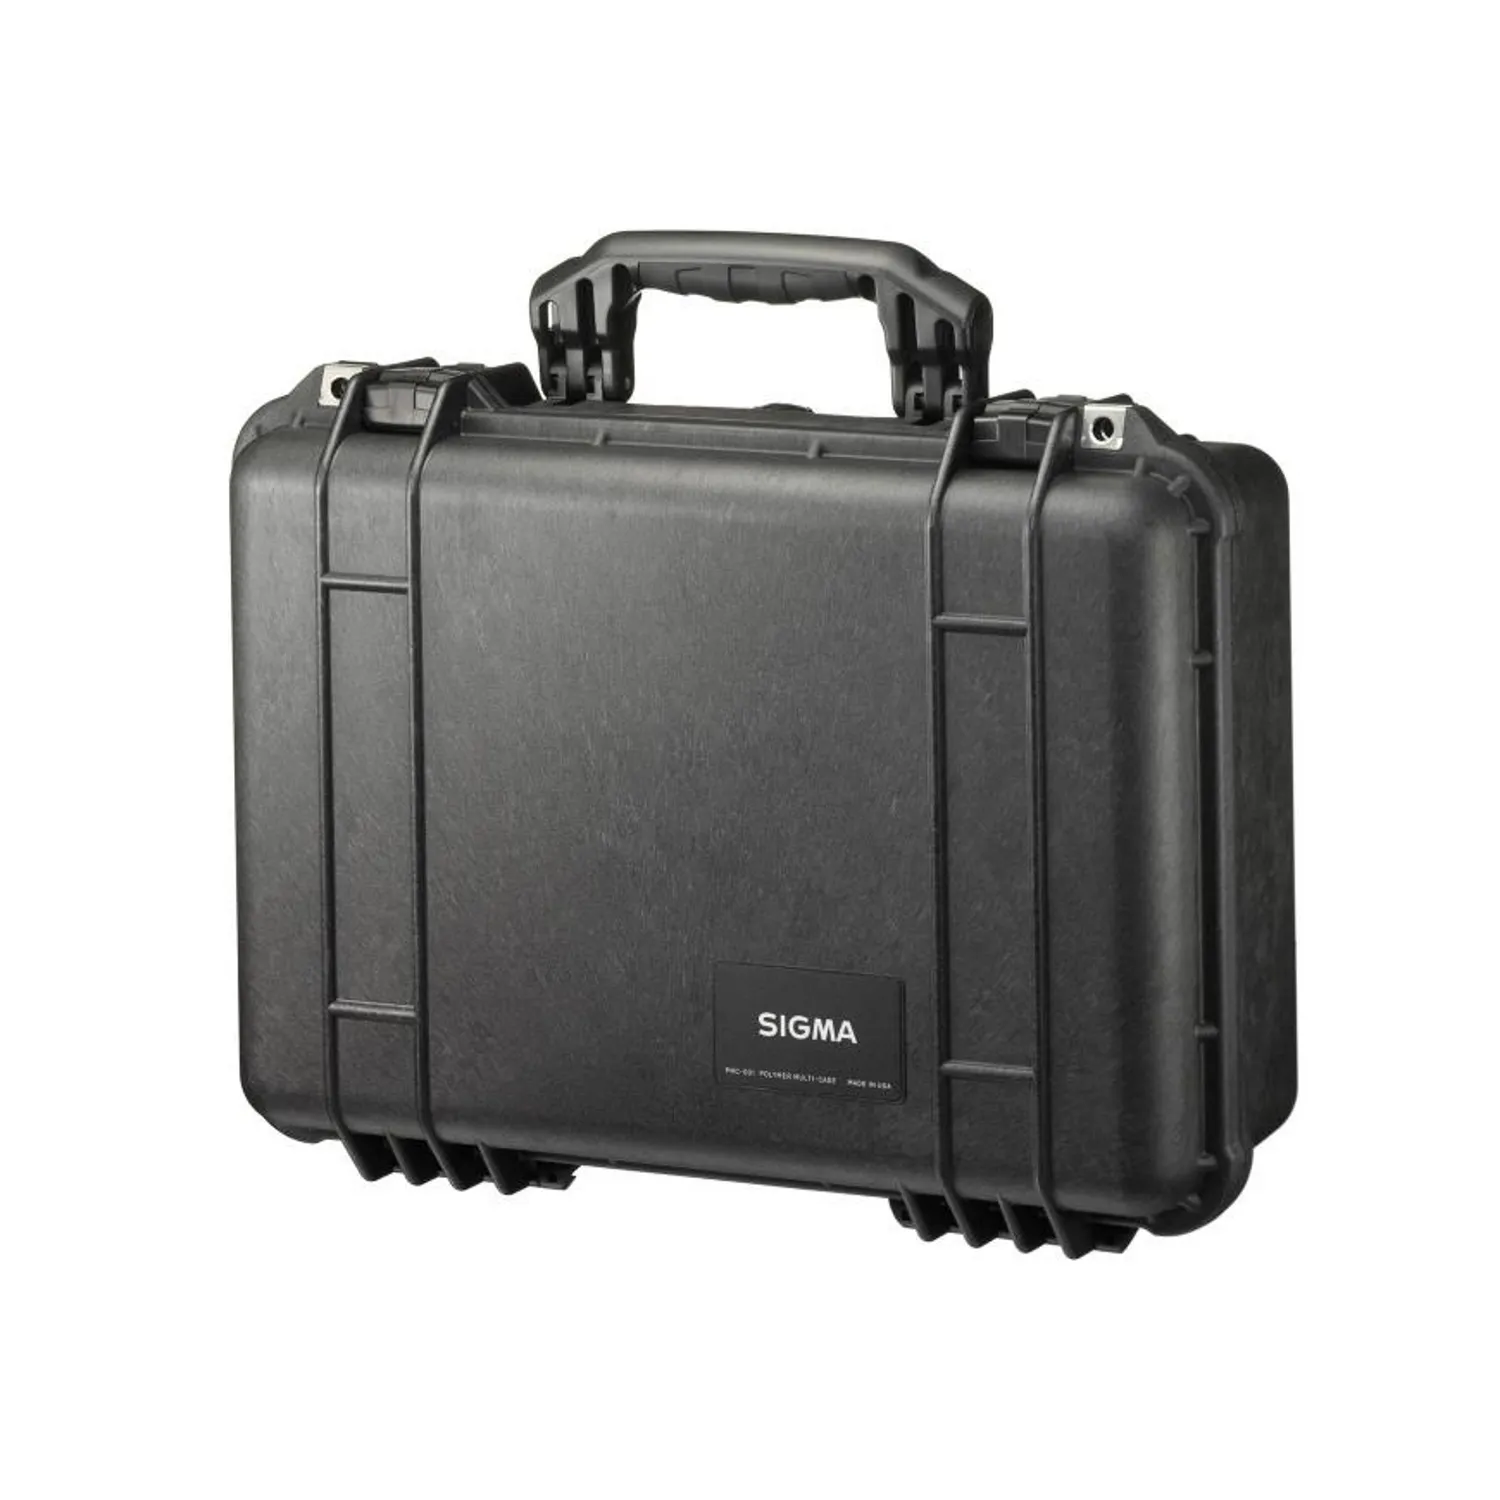 Sigma PMC-001 Hard Case for 18-35mm T2 and 50-100mm T2 Cine Lenses